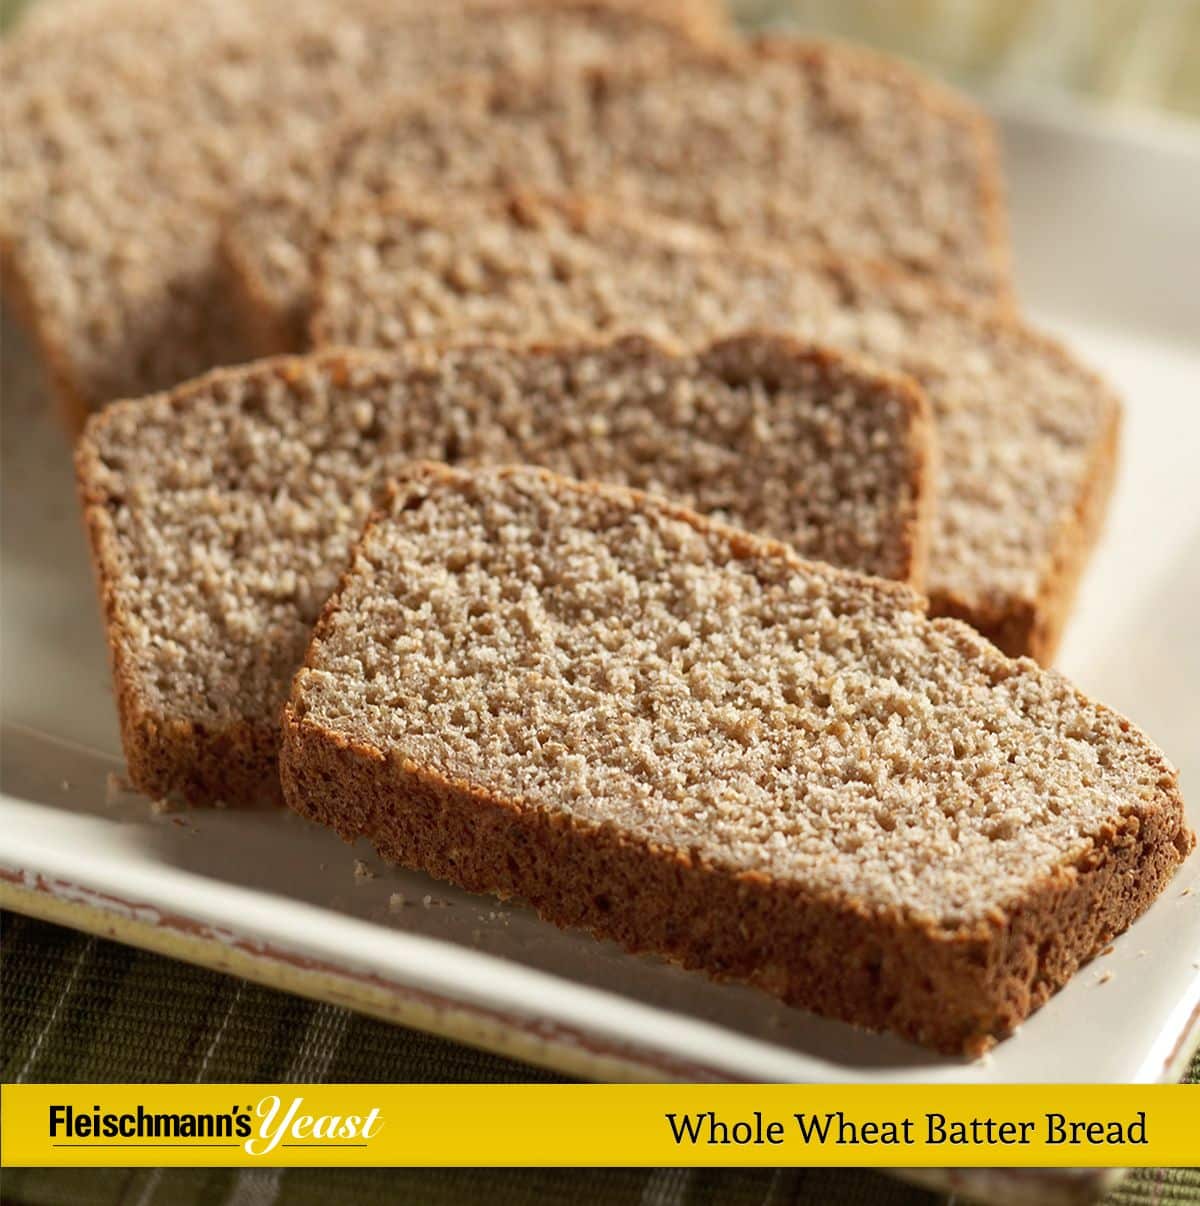 Whole Wheat Batter Bread is packed with fiber and protein